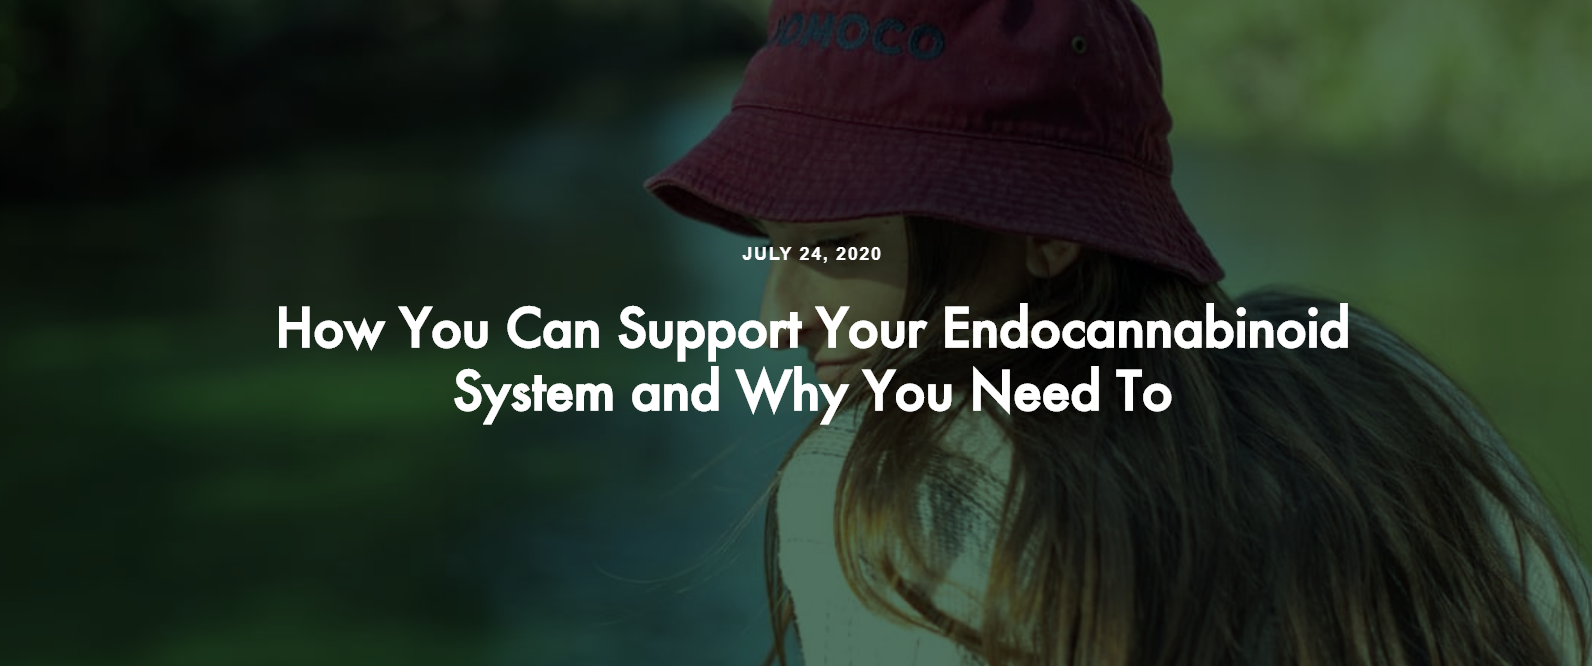 How You Can Support Your Endocannabinoid System and Why You Need To | Cannabis Blog